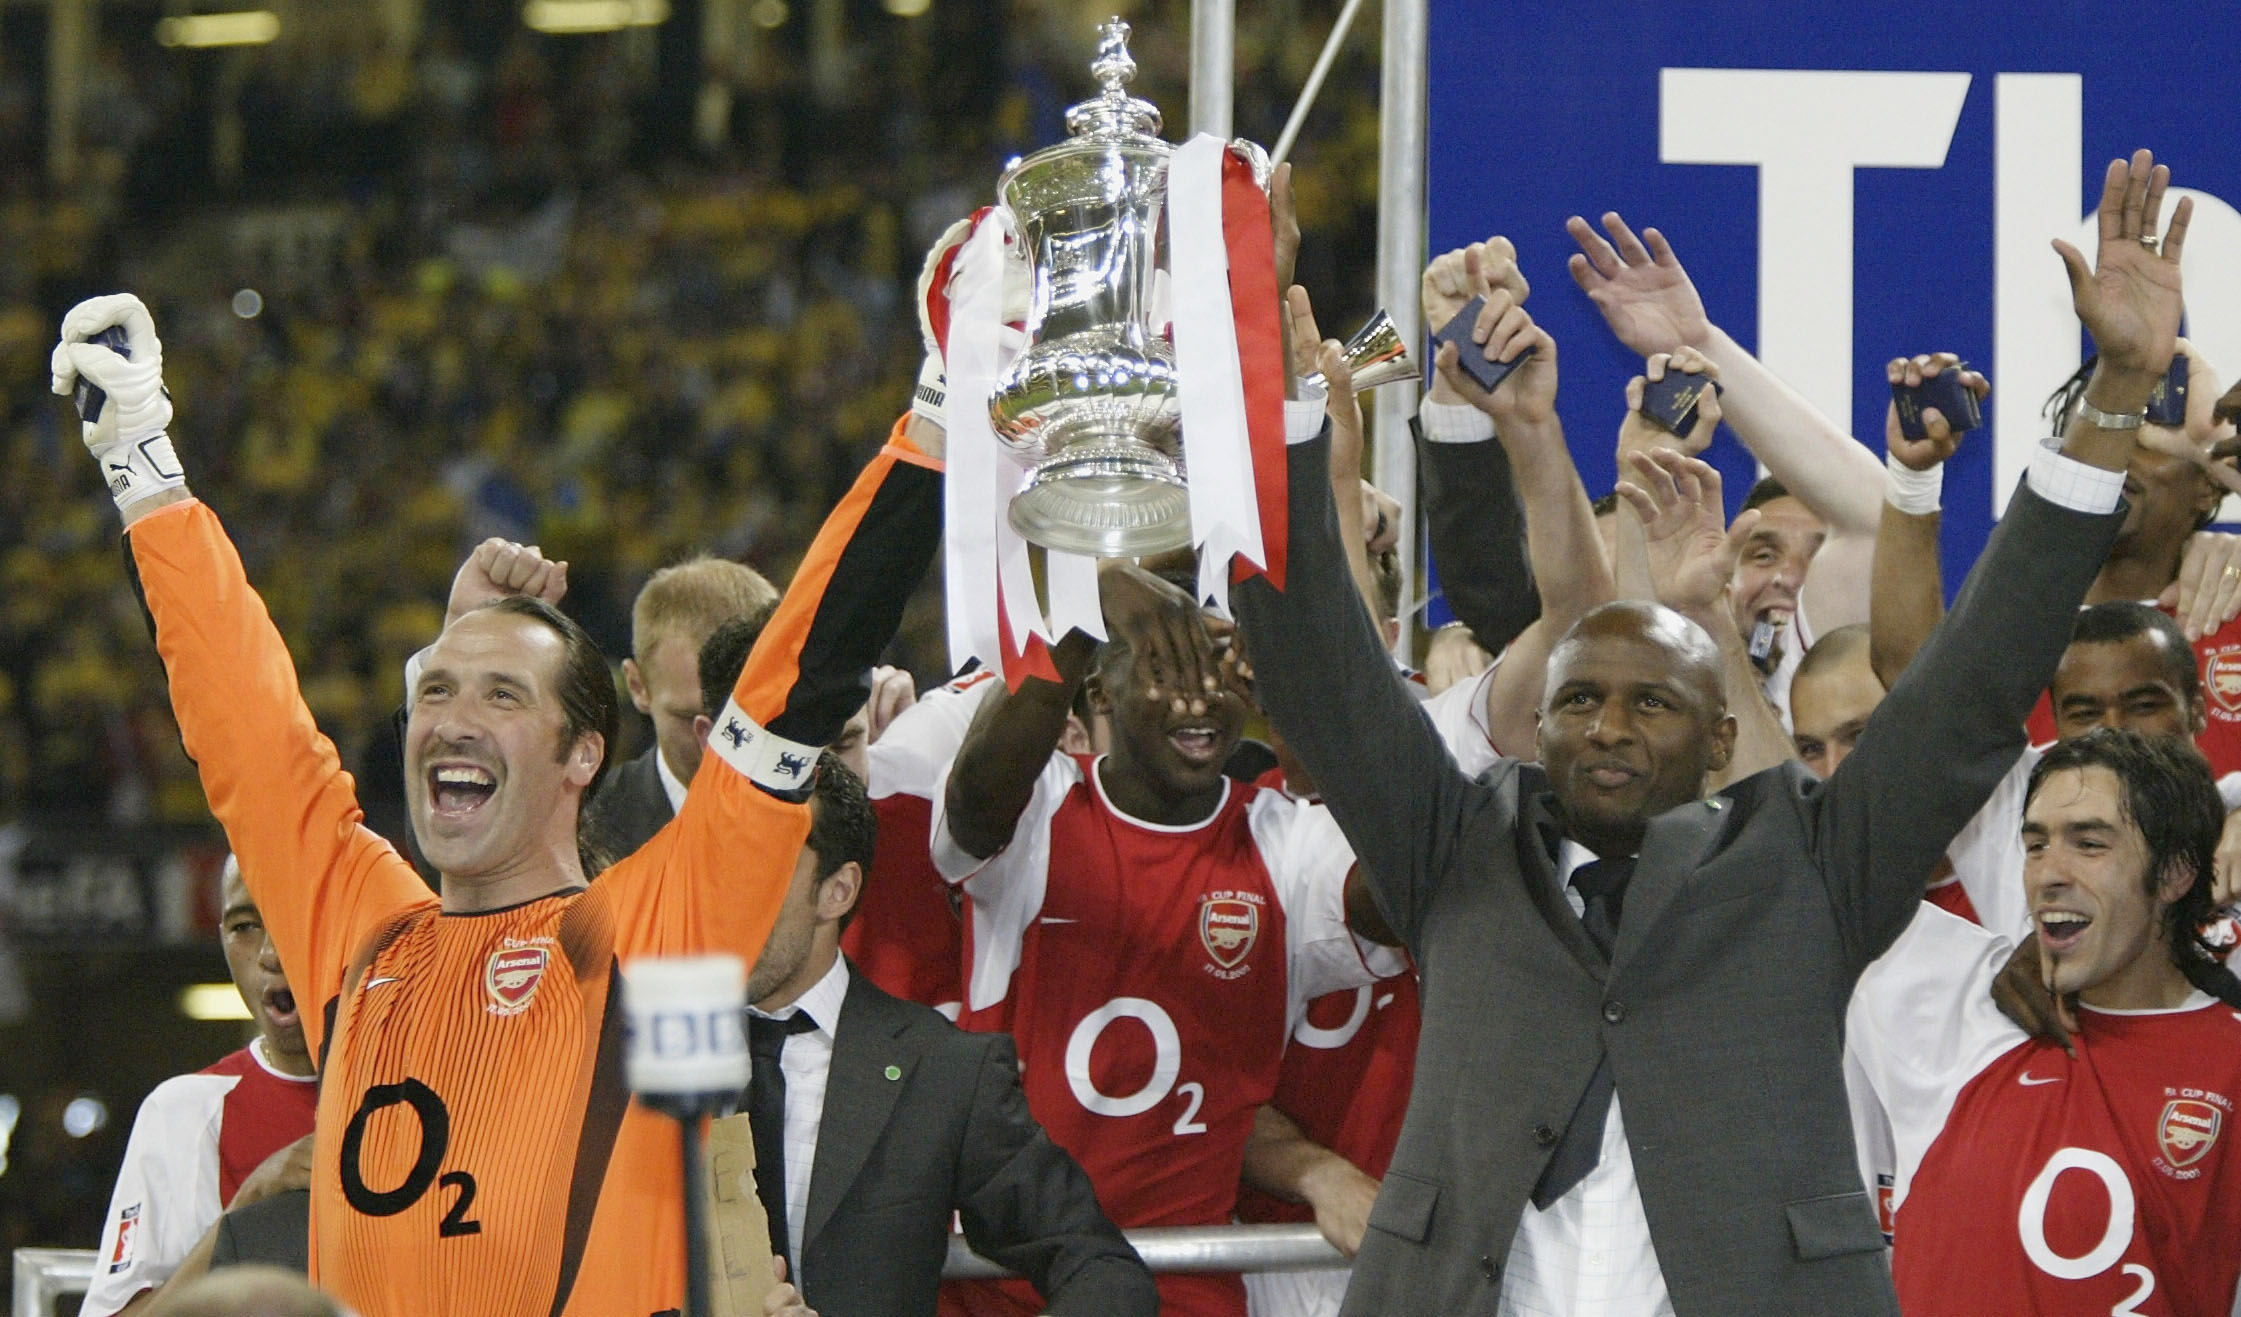 David Seaman and Patrick Vieira hold the FA Cup trophy aloft after Arsenal's win over Southampton in 2003.